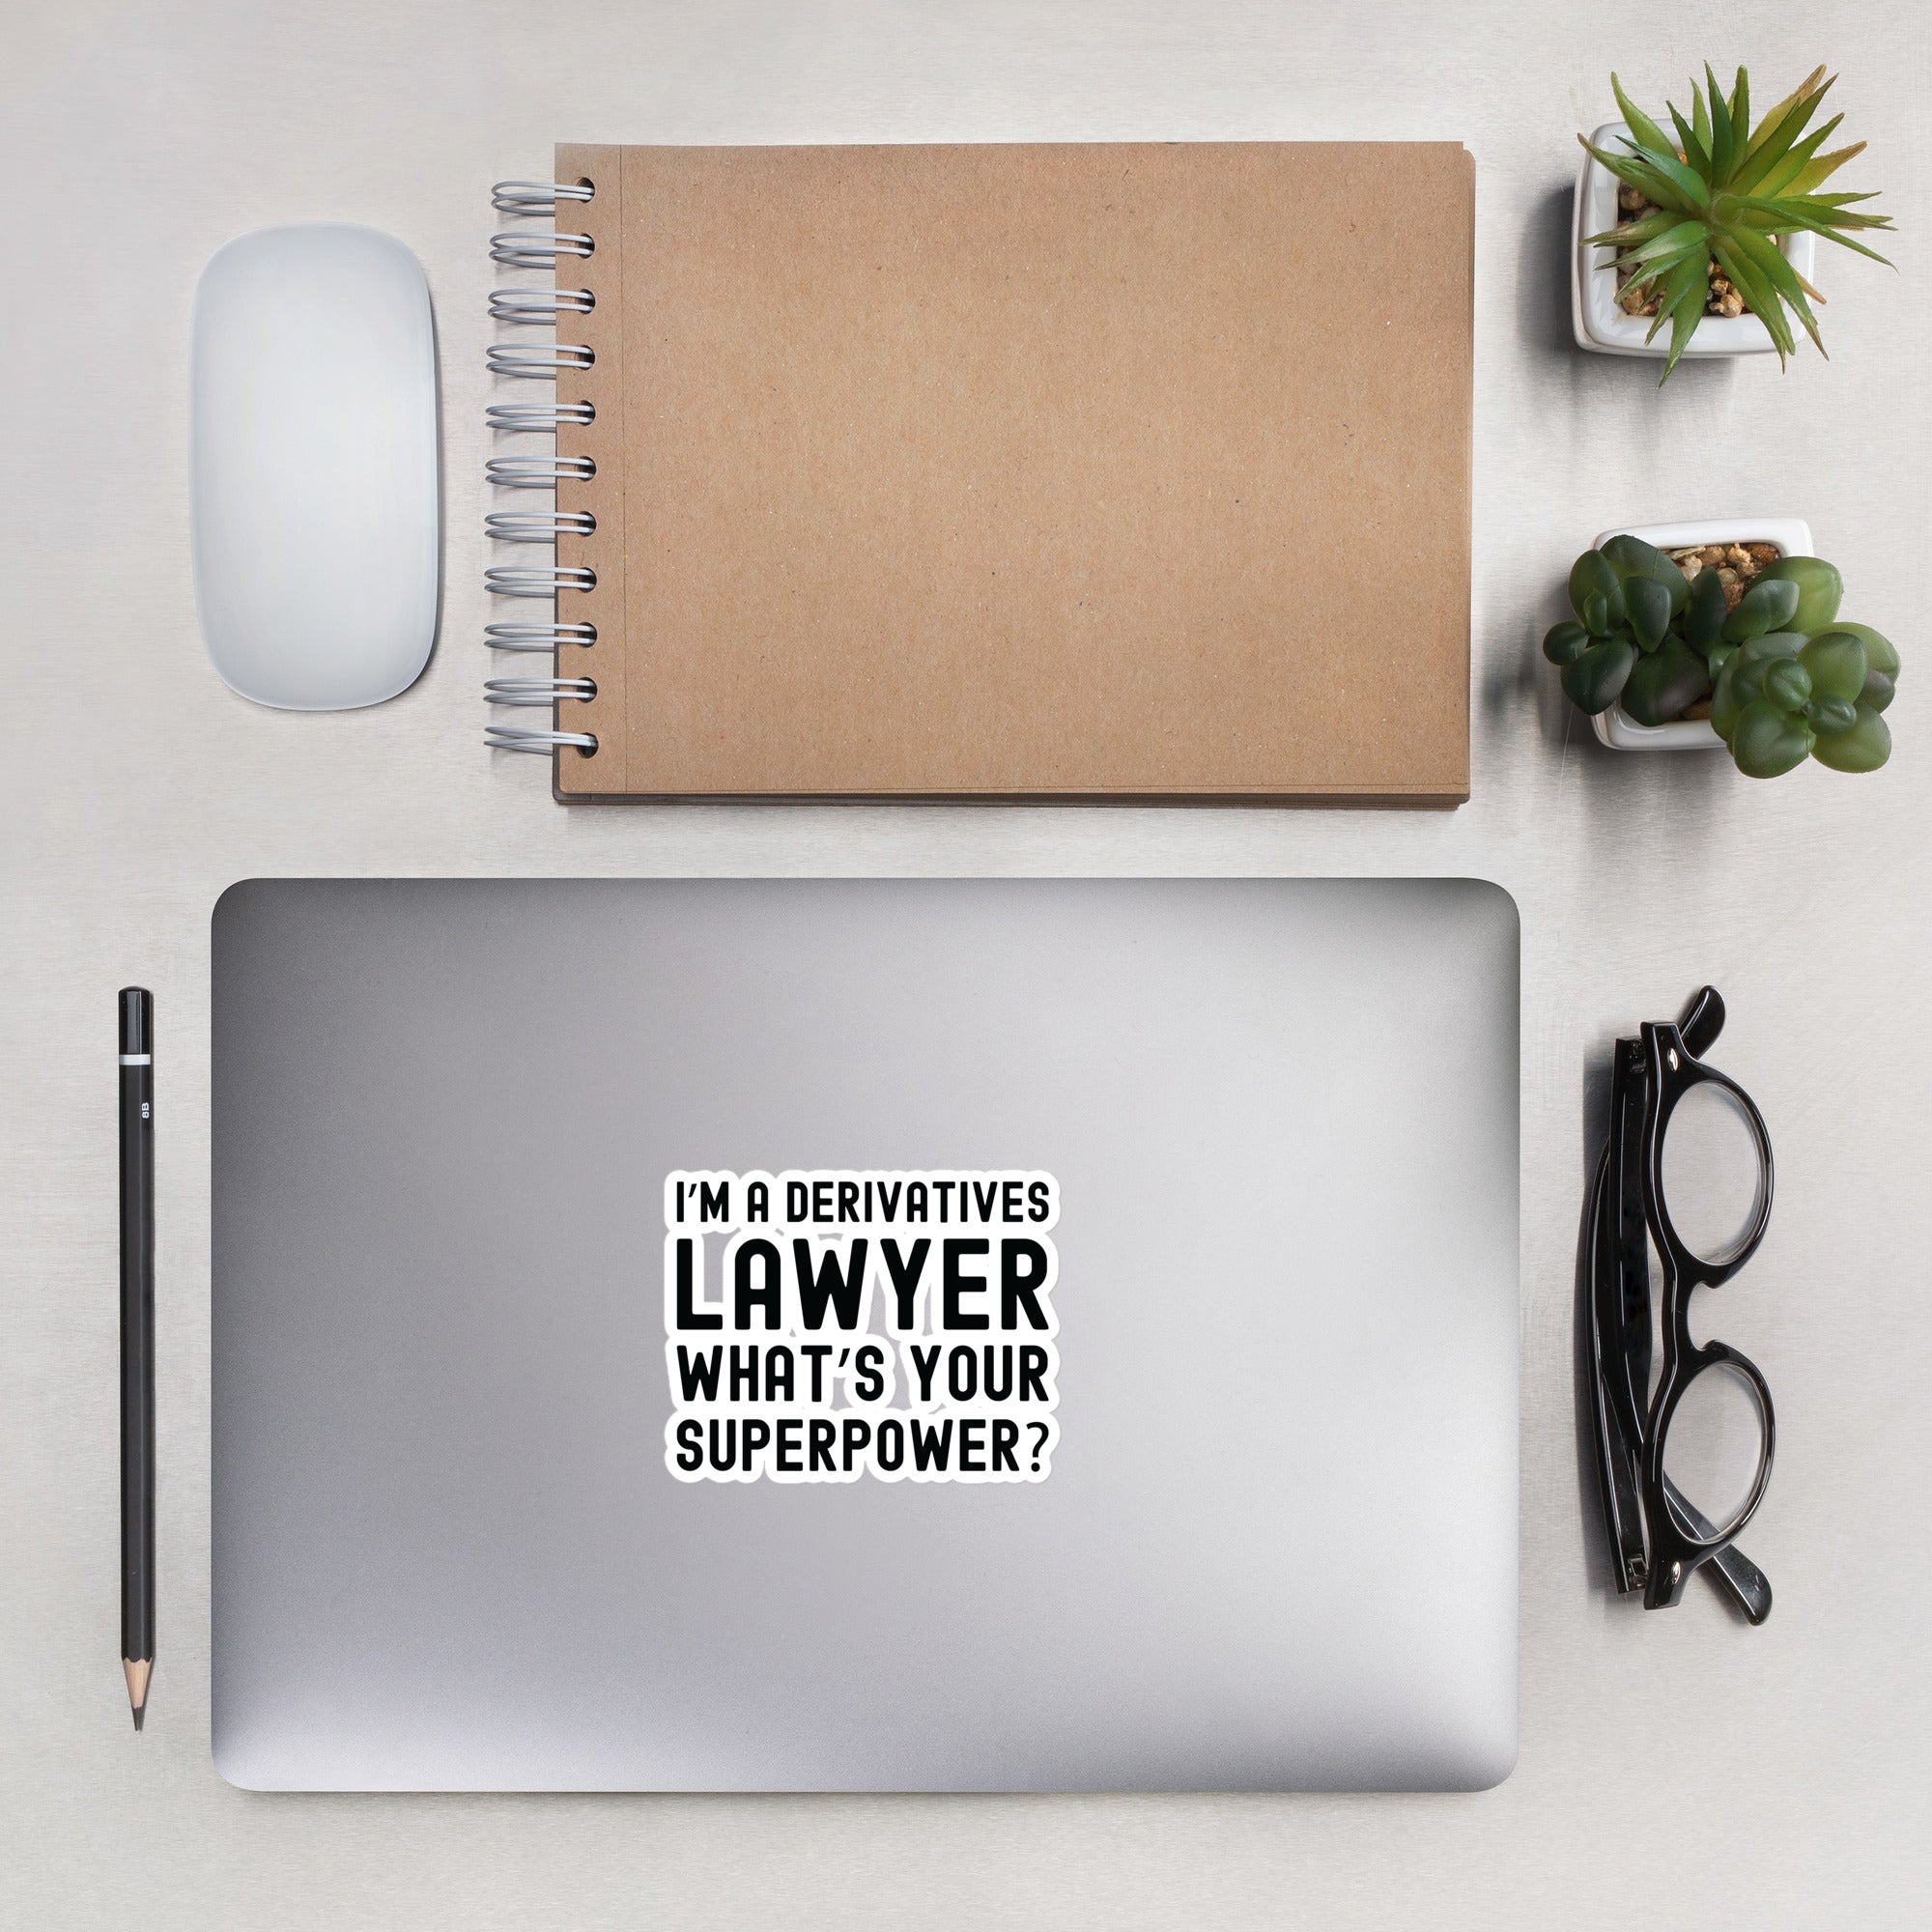 Bubble-free stickers | I’m a derivatives lawyer, what’s your superpower?